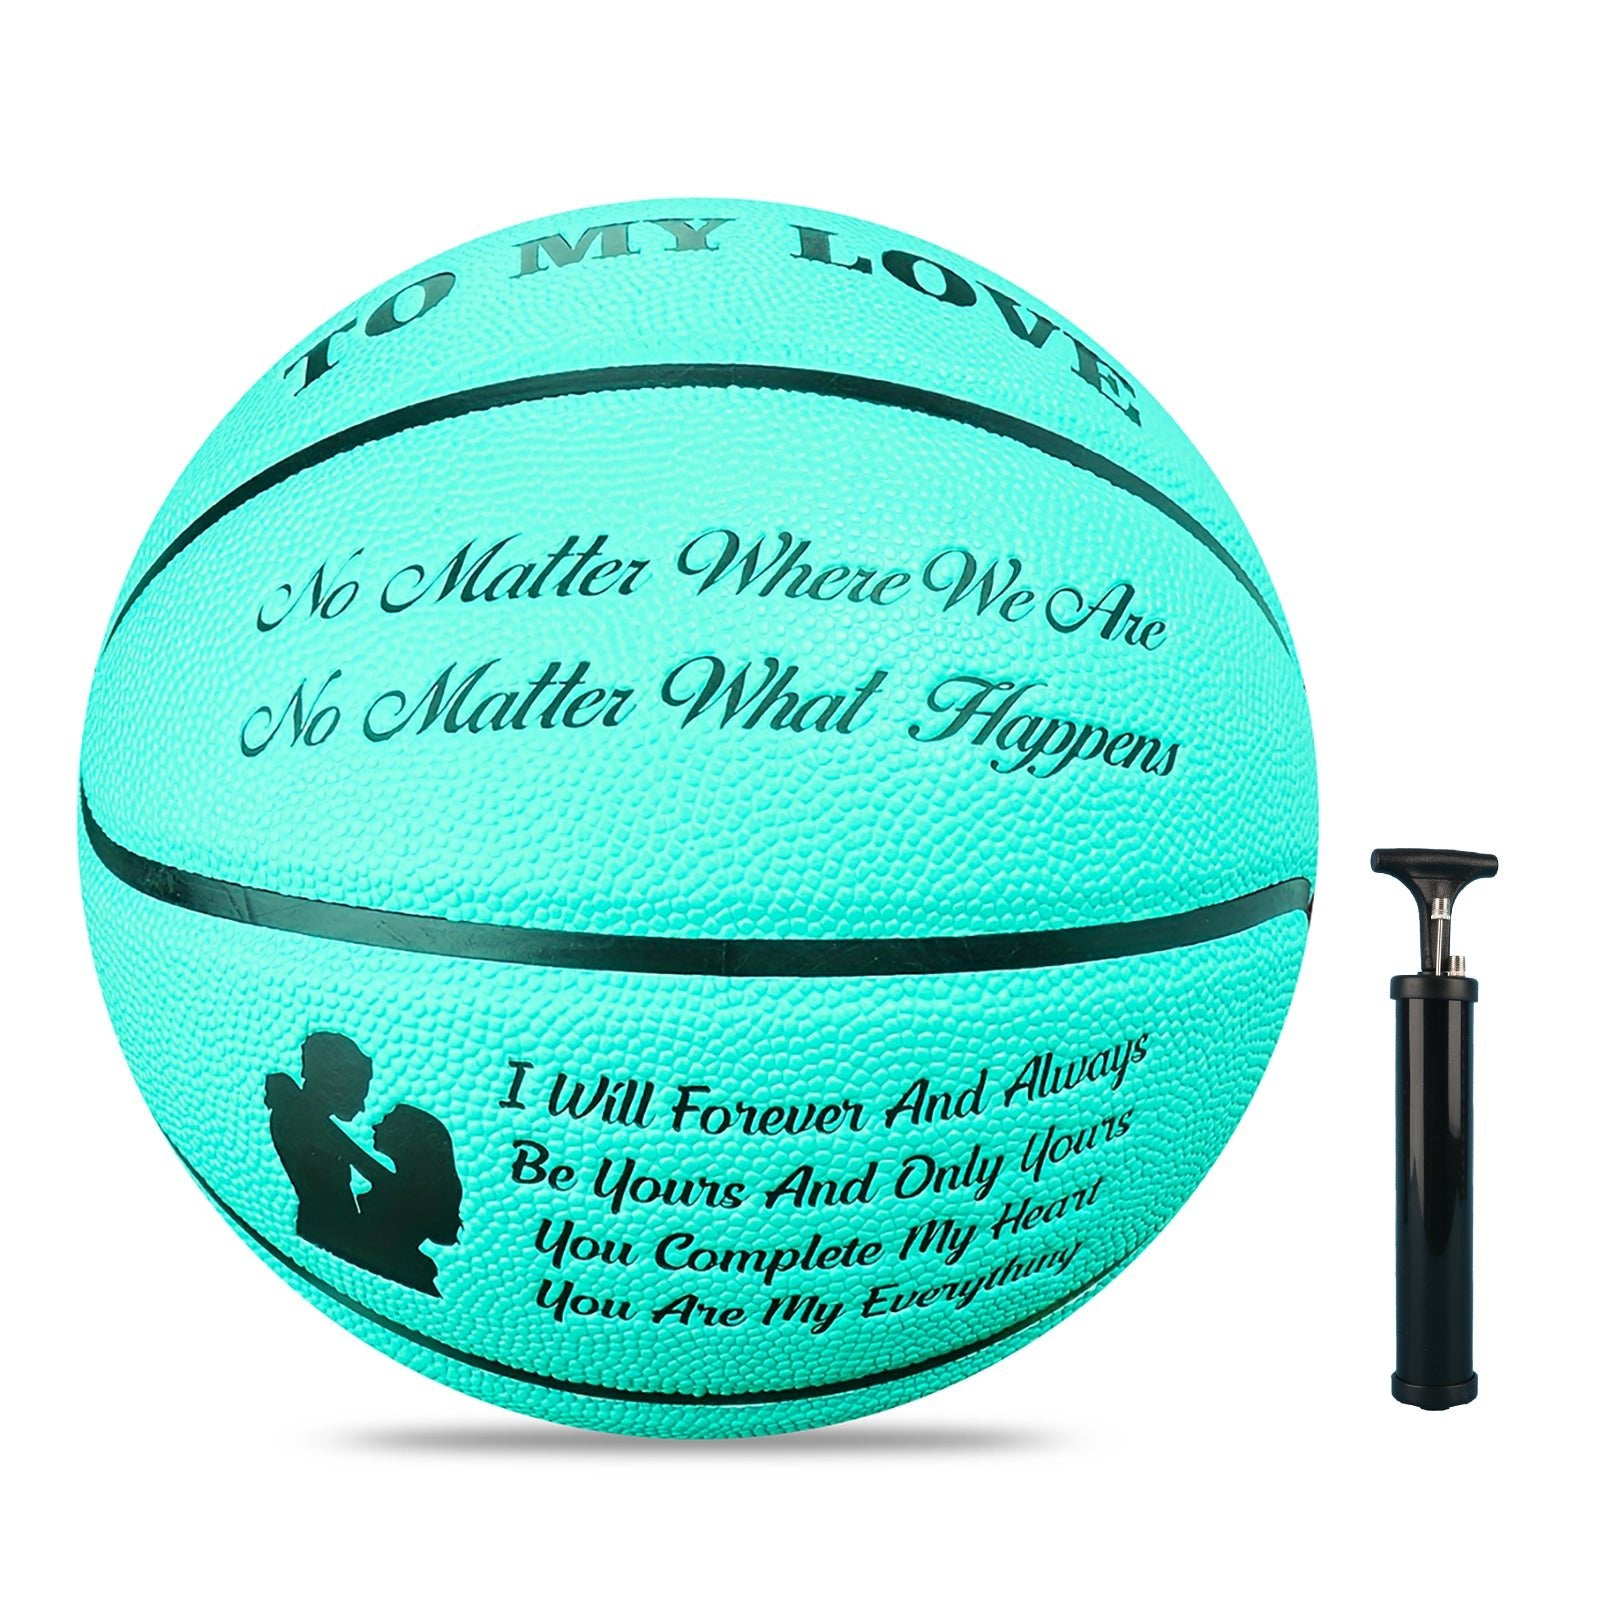 Personalized Letter Basketball For Love, Basketball Indoor/Outdoor Game Ball For Love, Birthday Christmas Gift For Her&him, Blue - Family Watchs